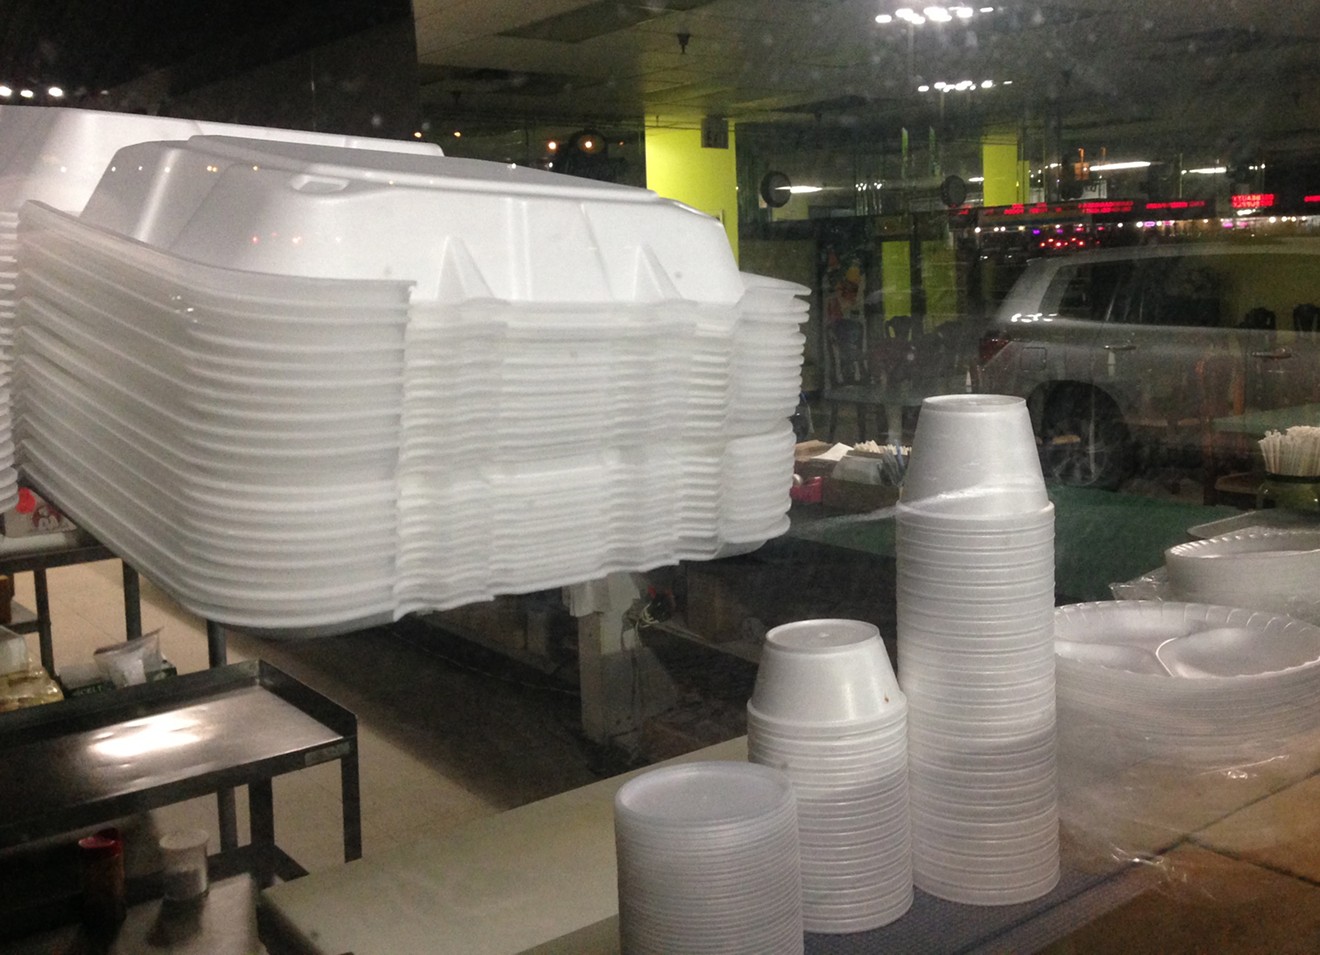 In 2016, Coral Gables passed a city law banning the use of expanded polystyrene, otherwise known as the trademark Styrofoam.